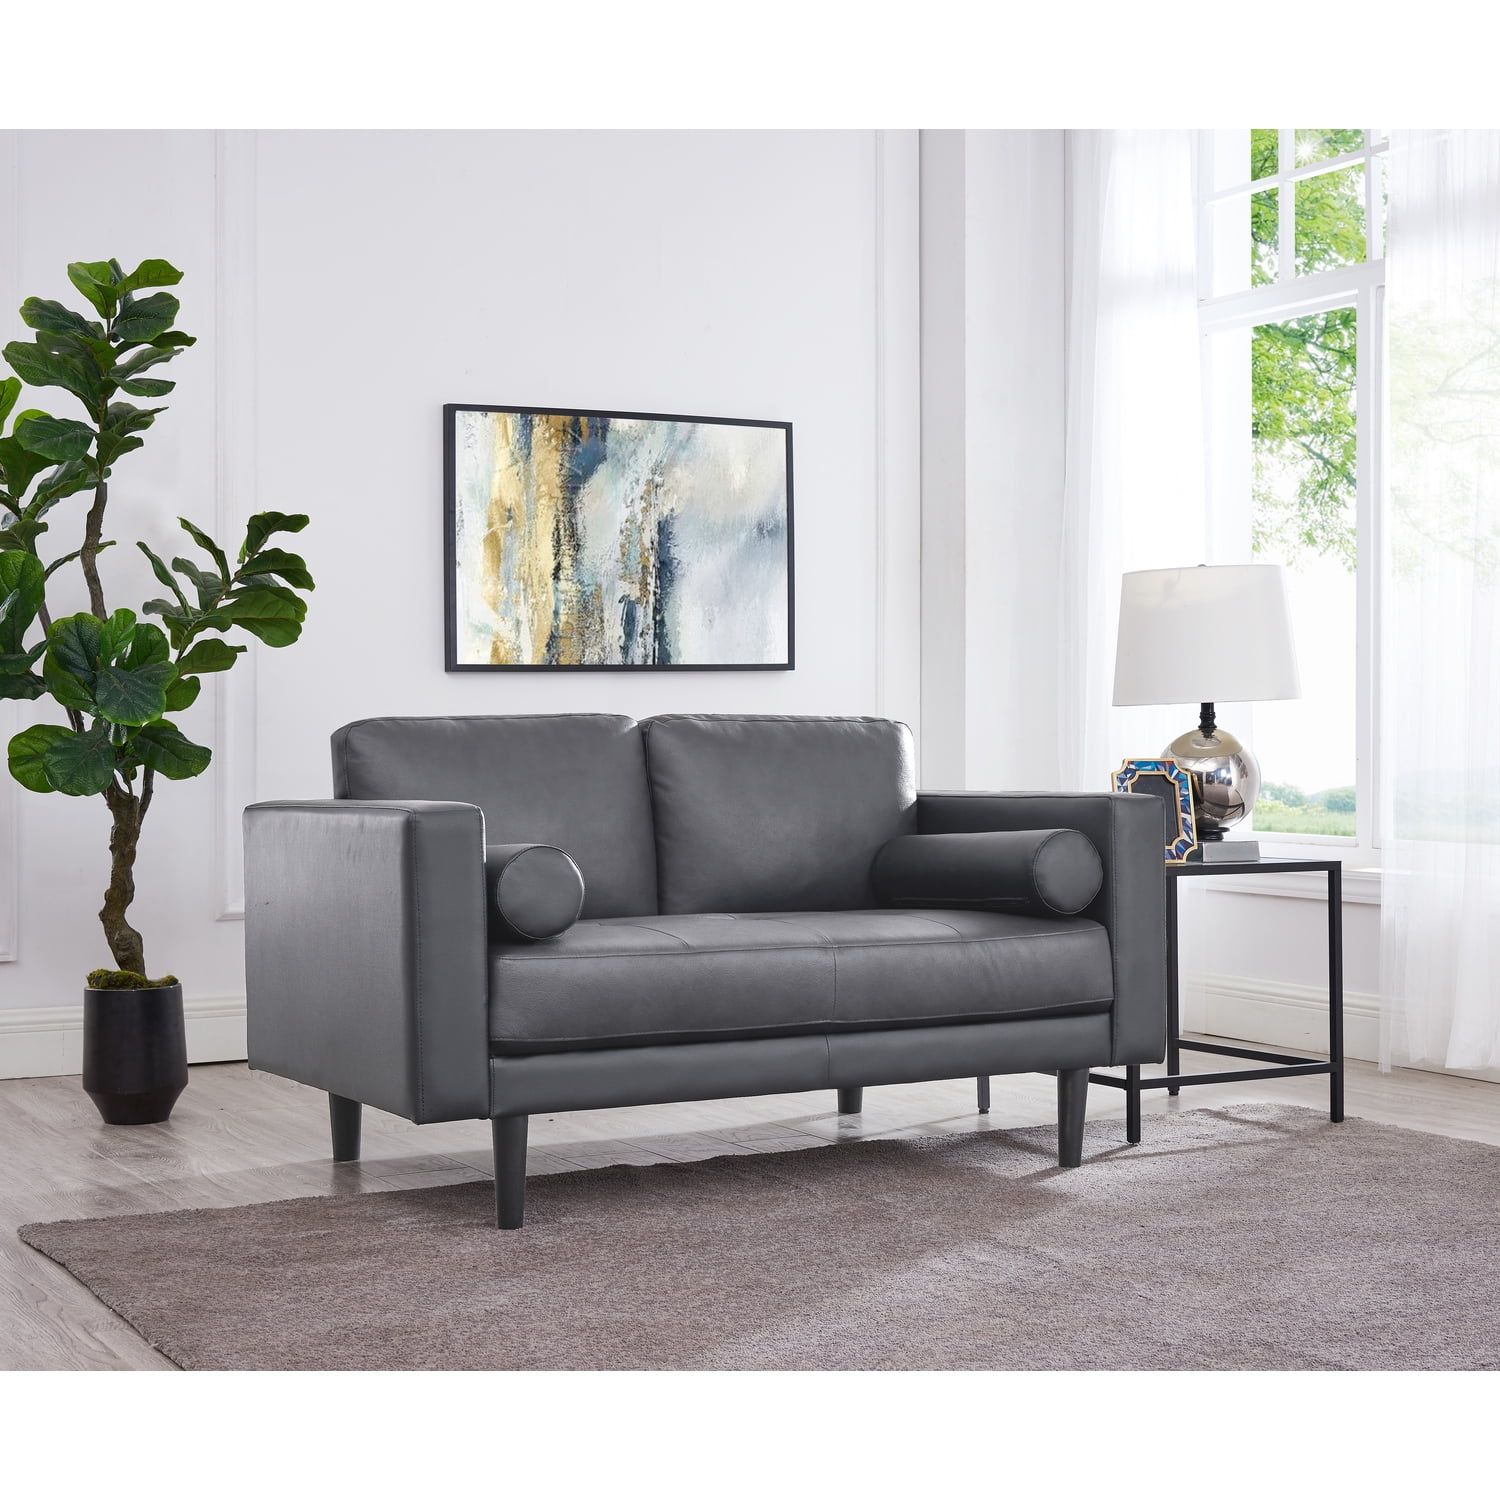 Modern Top Grain Leather Loveseat In Gray, Loveseat Sofa Couch For Bedroom,  Living Room Furniture, Space Saving 2 Seater Couch For Living Room,  Bedroom, Apartment, Small Spaces, Gray – Walmart Inside Top Grain Leather Loveseats (View 7 of 15)